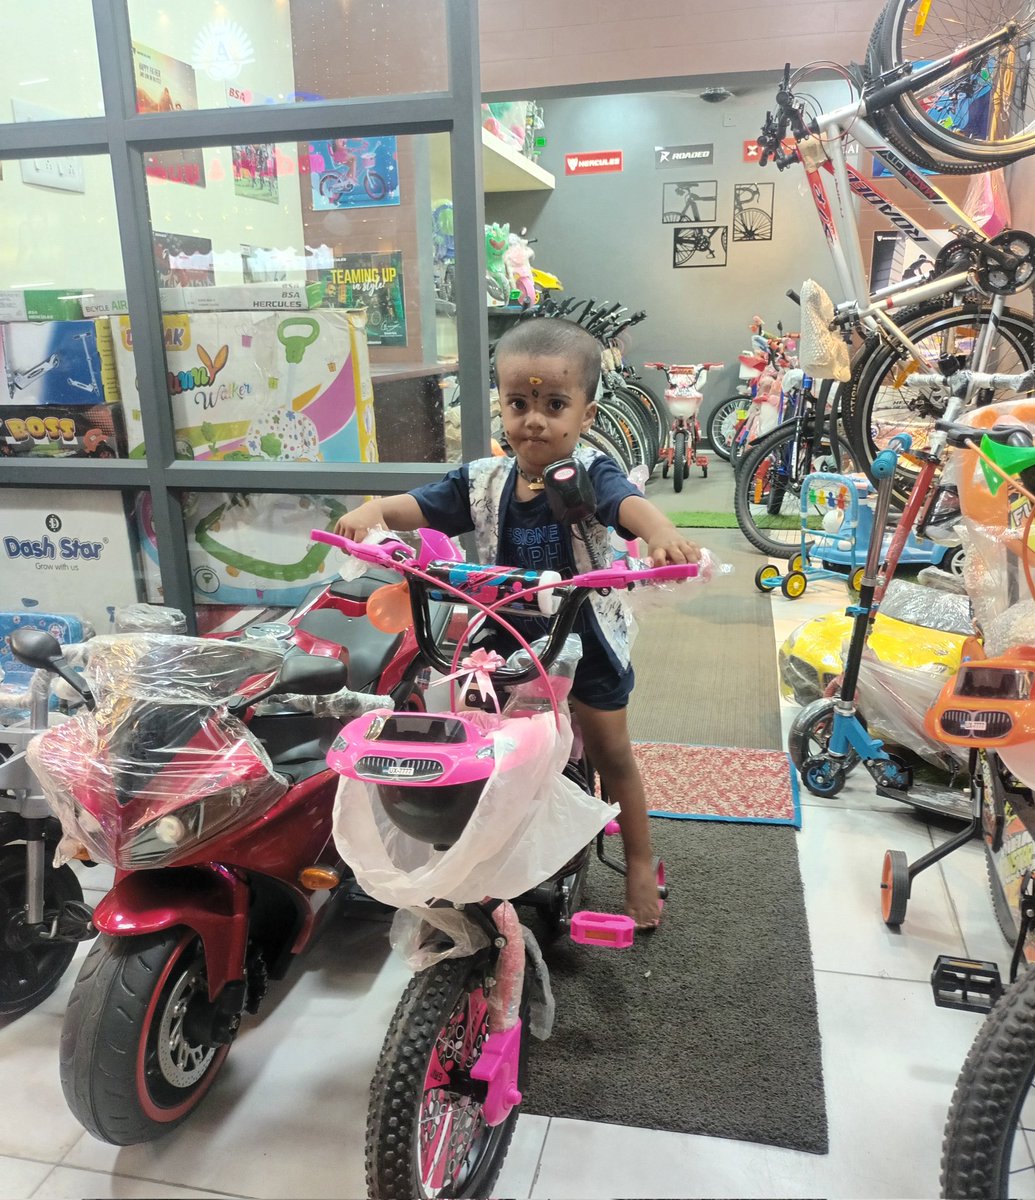 #LScycles 🚲 🚴‍♀️
#Madurai  #NammaMadurai

Thankyou for Purchase at #LScycles
#ParentsSpcialGift 

Best wishes to kid ✨️ 
#MyFirstCycle #HappyRide #Healthy #MyCycle